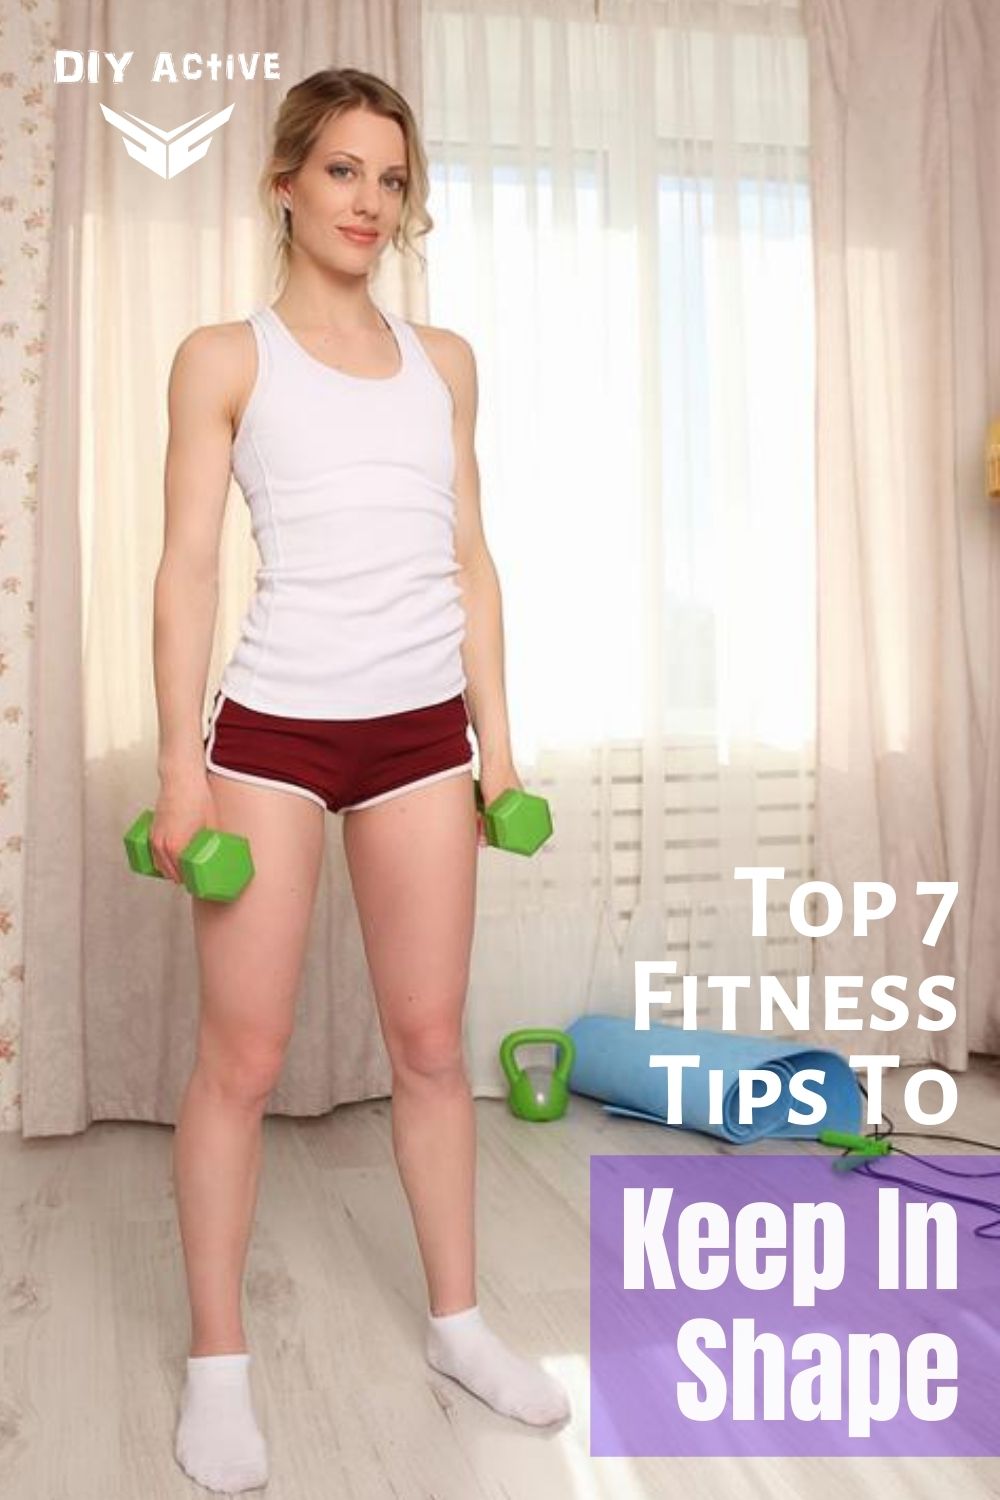 Top 7 Fitness Tips To Keep In Shape